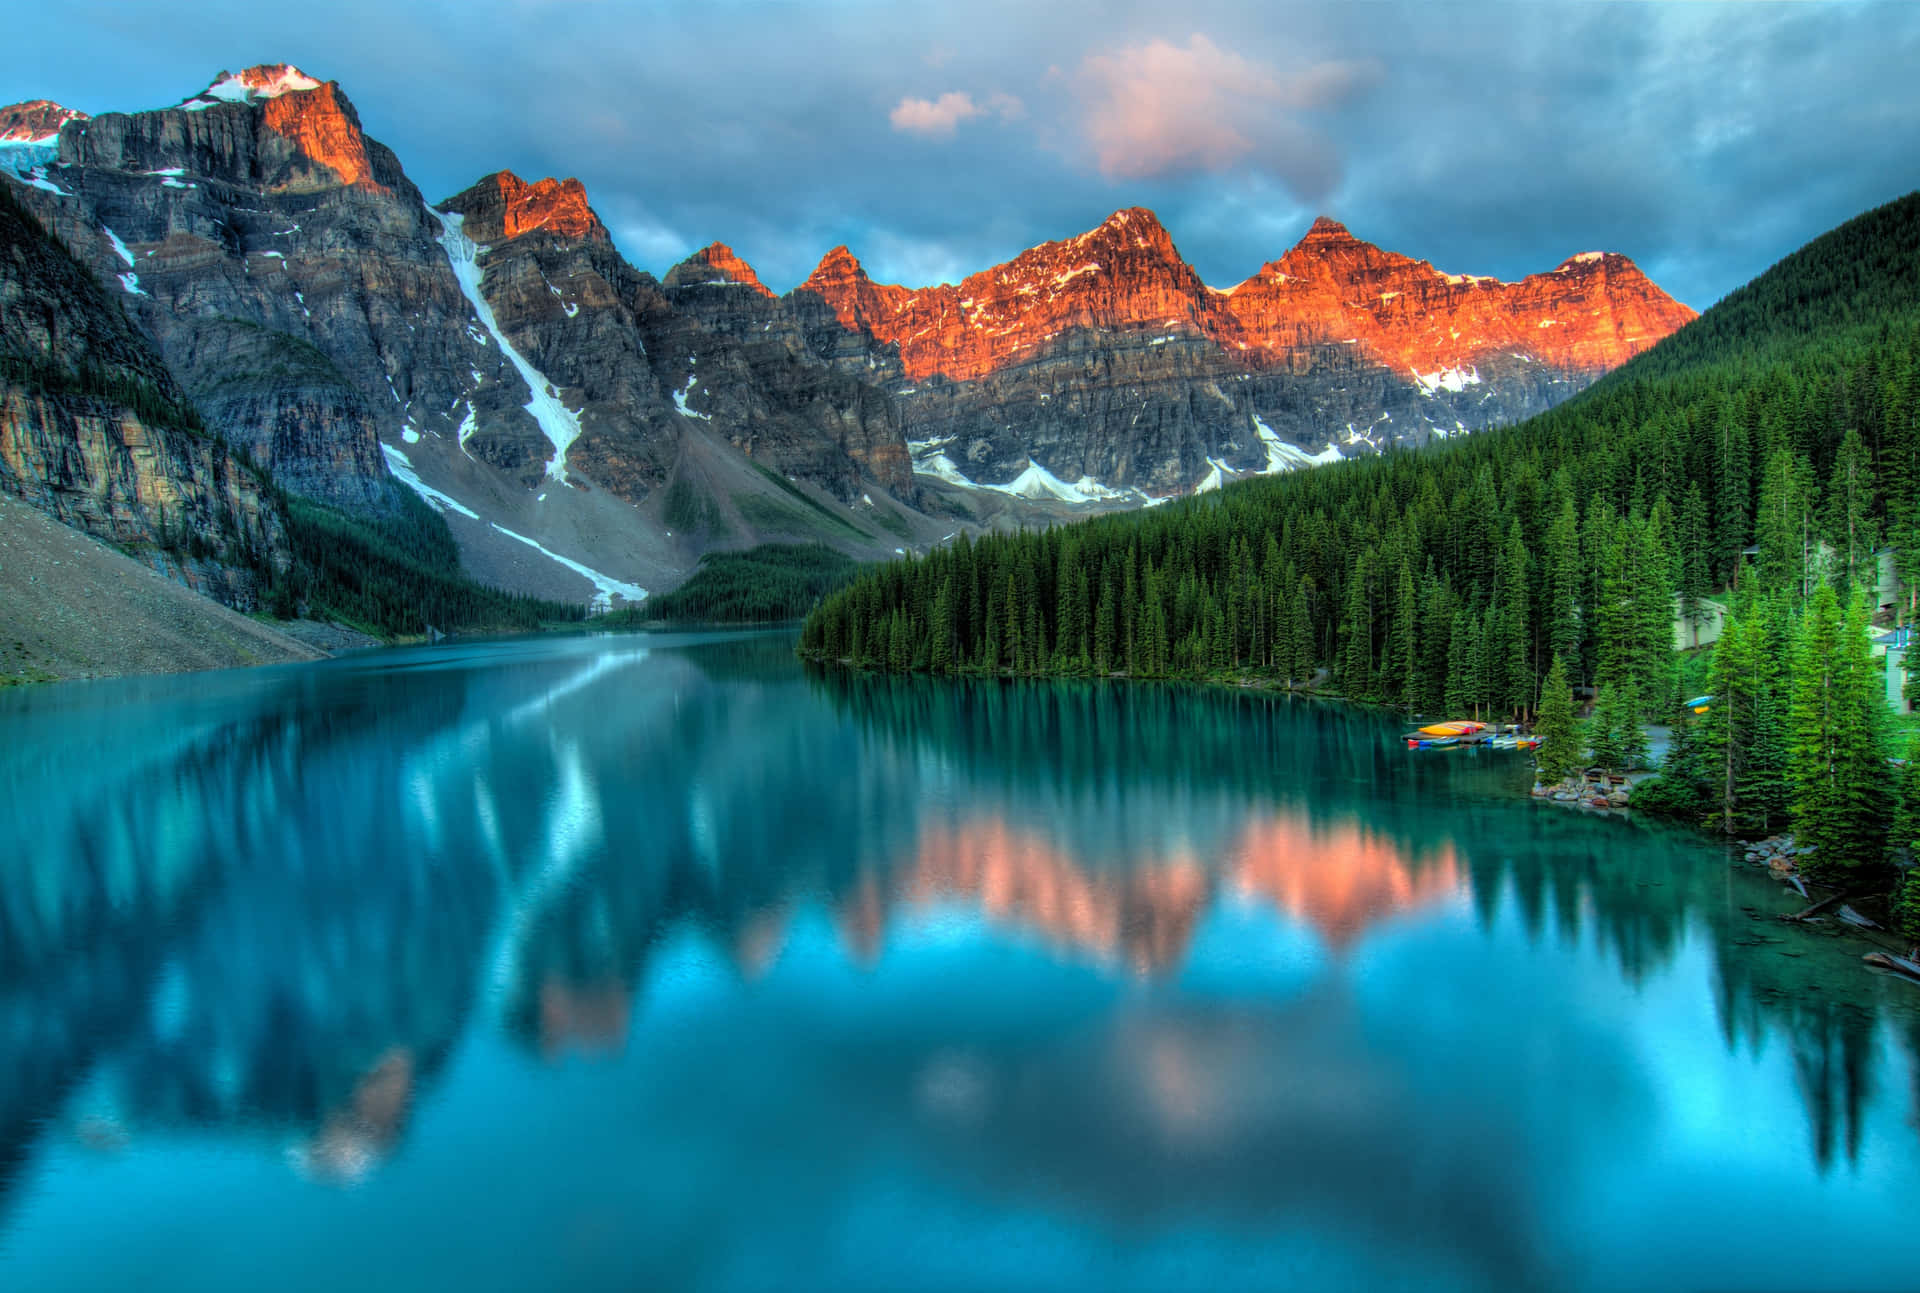 Capture the beauty of a majestic mountain range Wallpaper